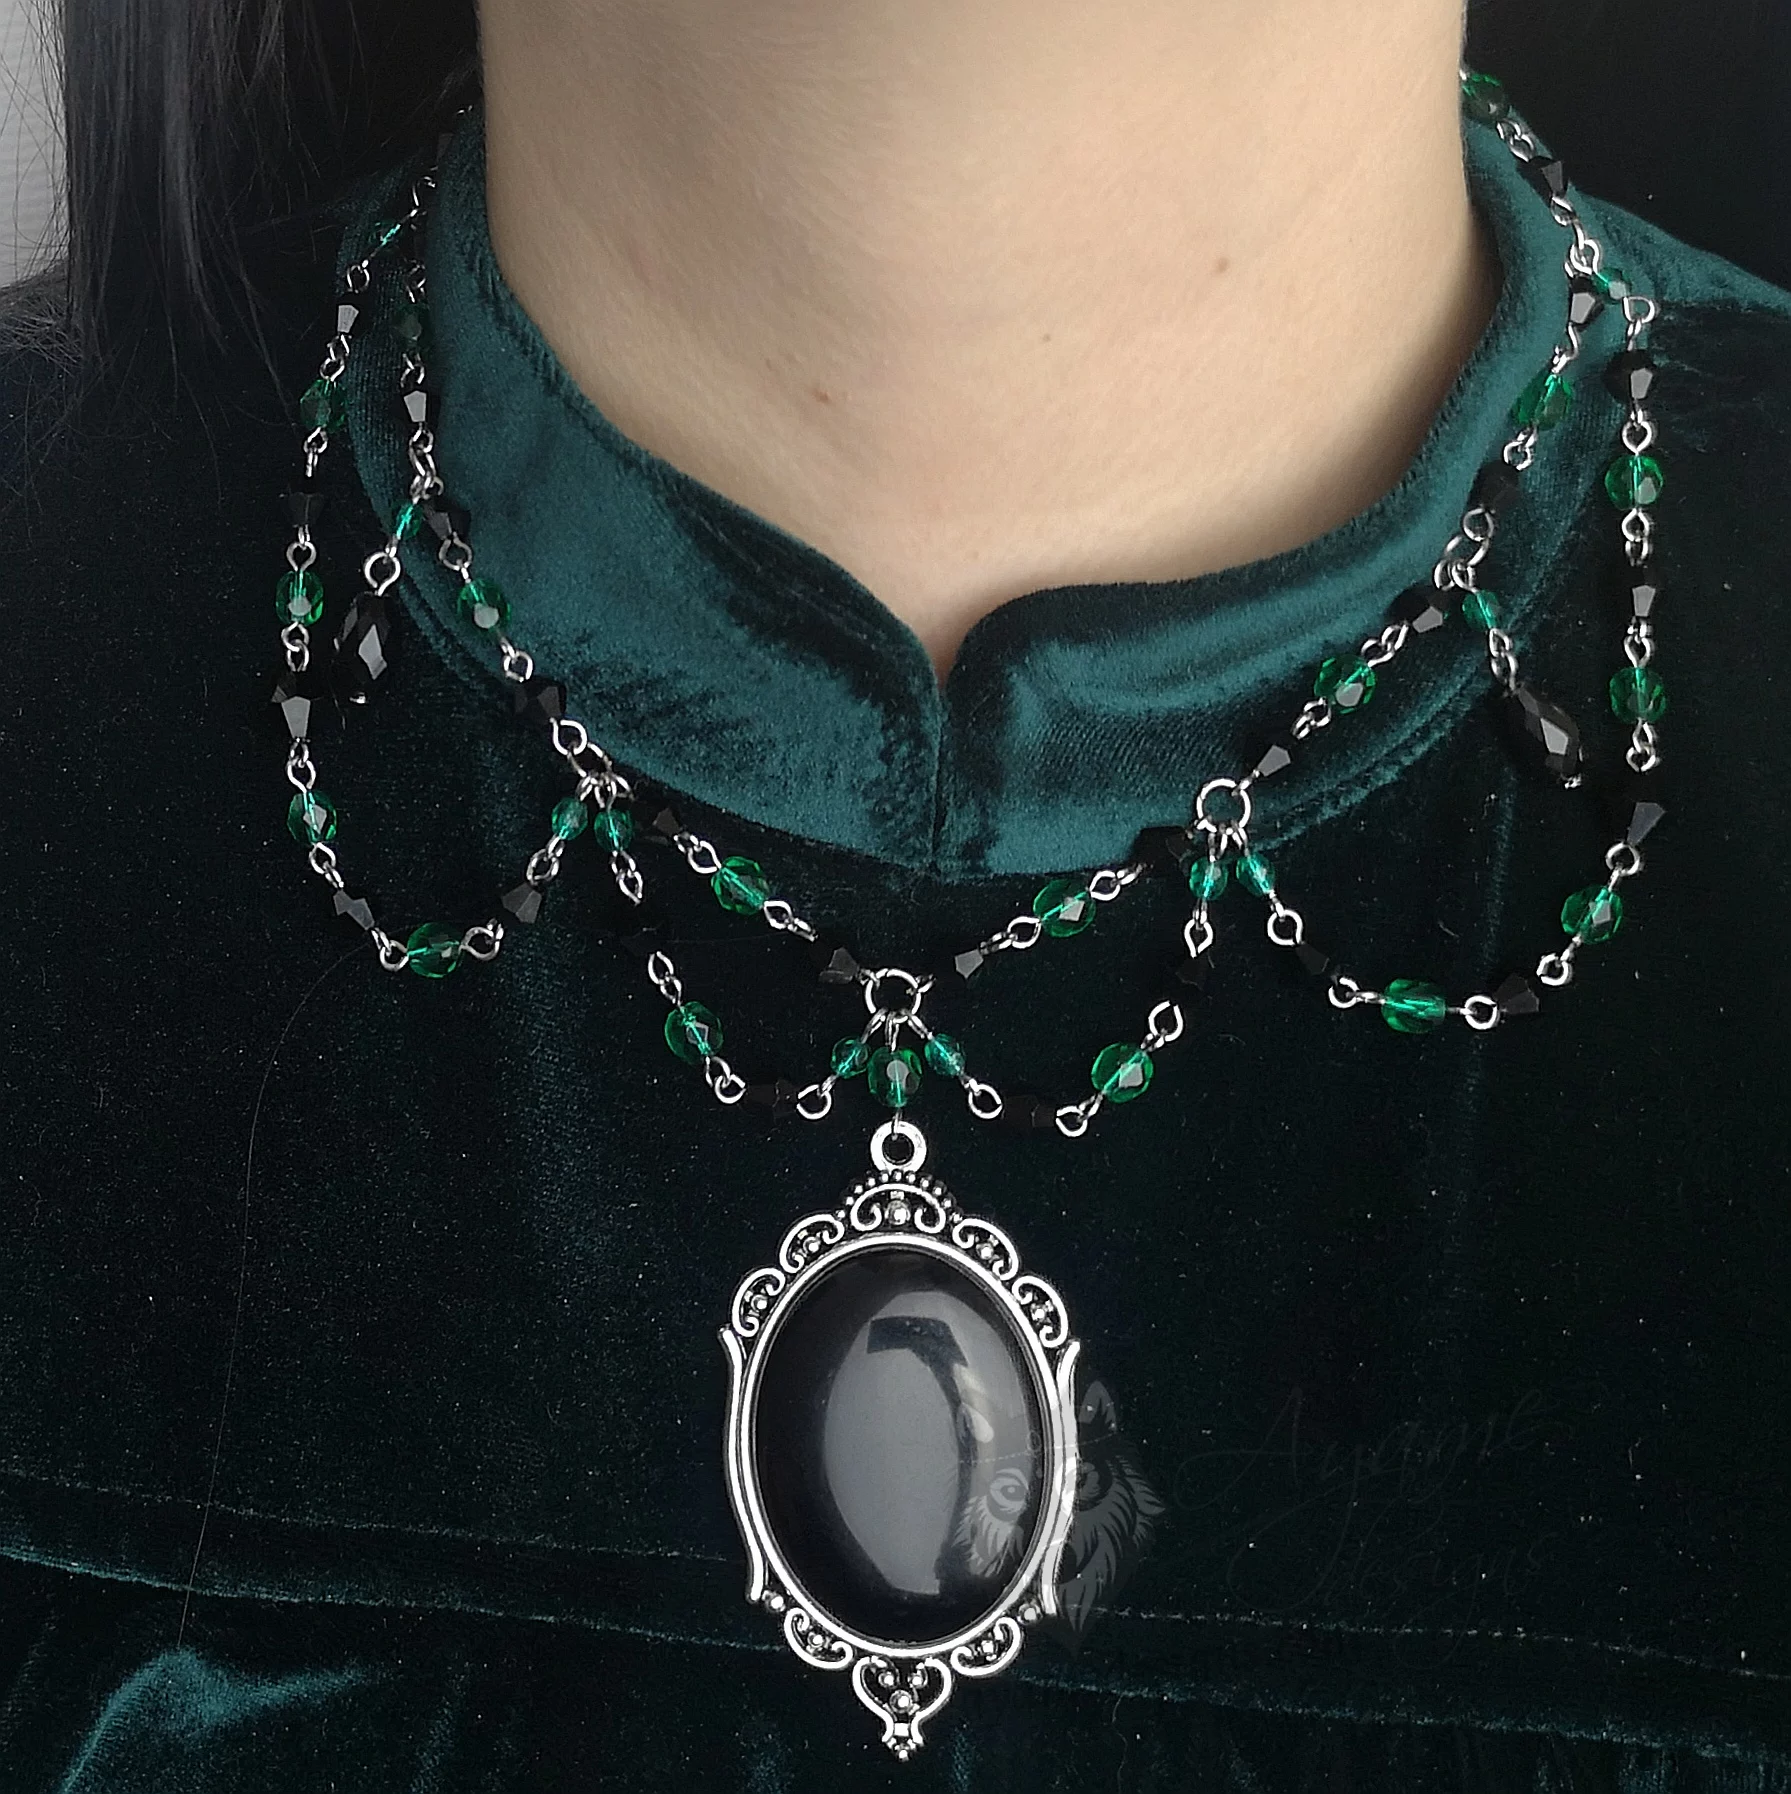 Handmade beaded choker necklace with green Czech crystal beads, black Austrian crystal beads and a large black cabochon in a filigree frame